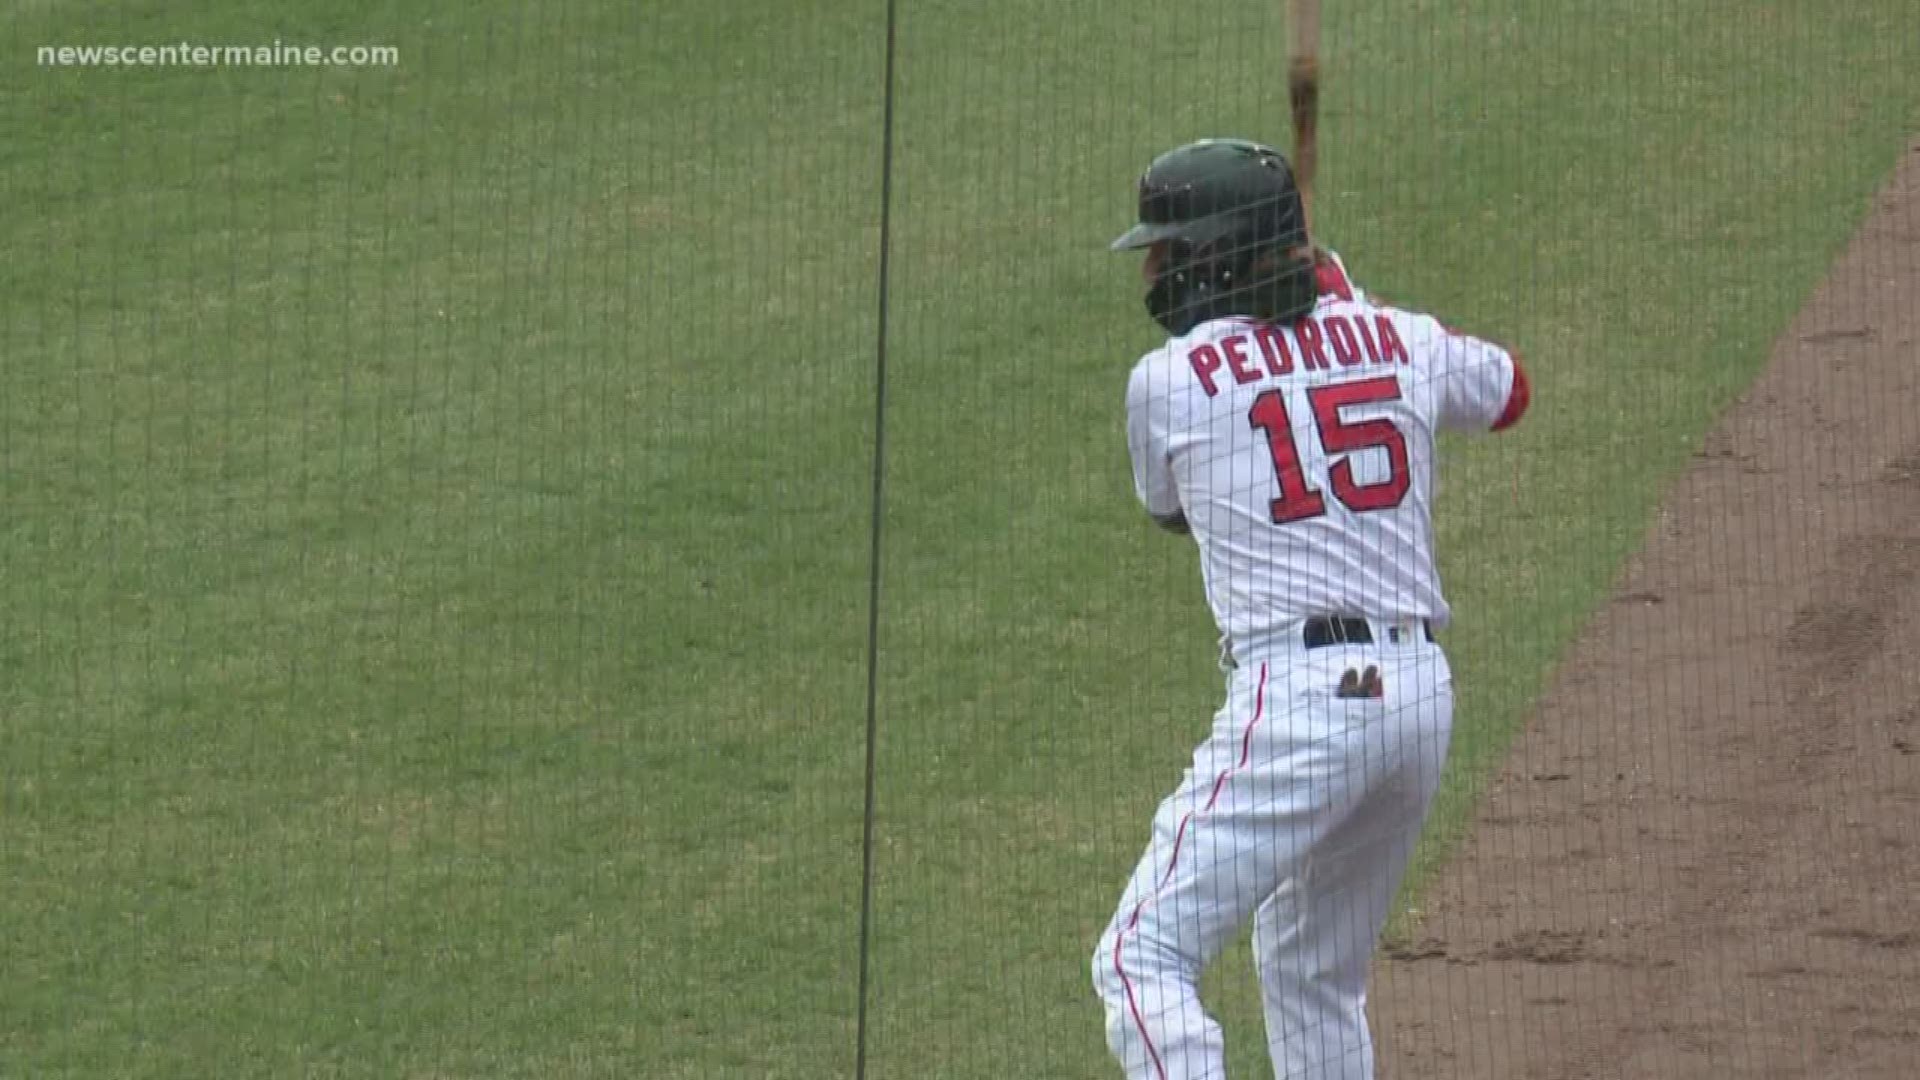 Boston Red Sox's Justin Pedroia played at Hadlock Field in Portland on a rehab assignment Thursday.